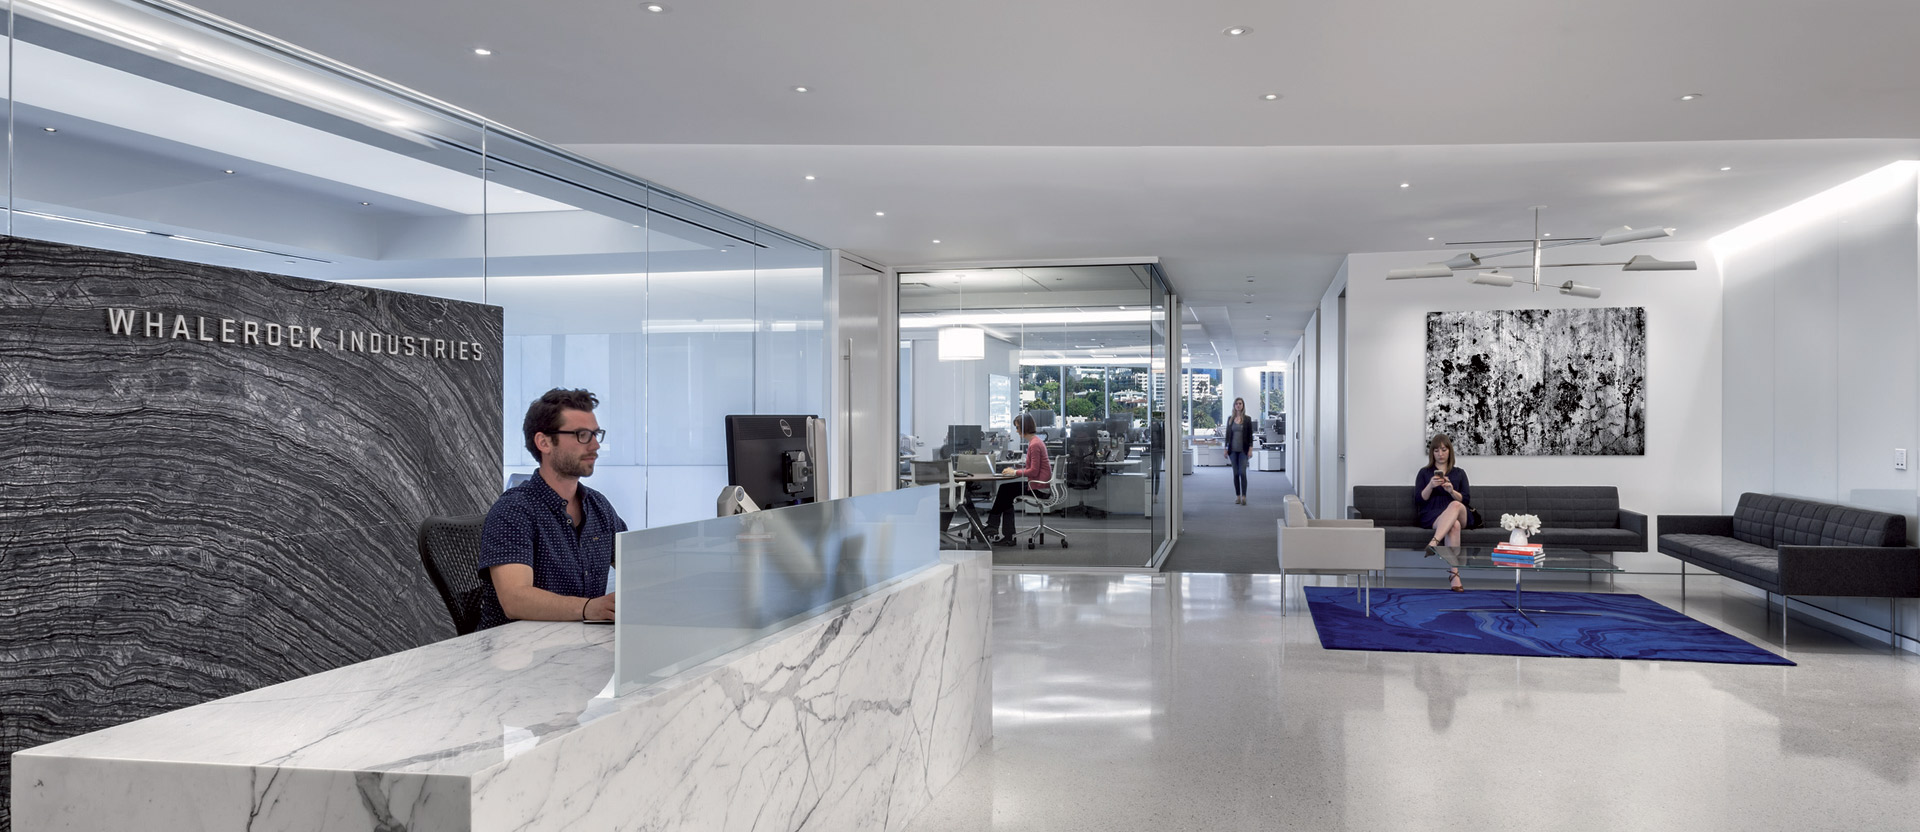 Spacious office lobby with natural light featuring a striking white marble reception desk, minimalist black seating, and modern art. Sleek lines and neutral tones create a welcoming yet professional atmosphere.